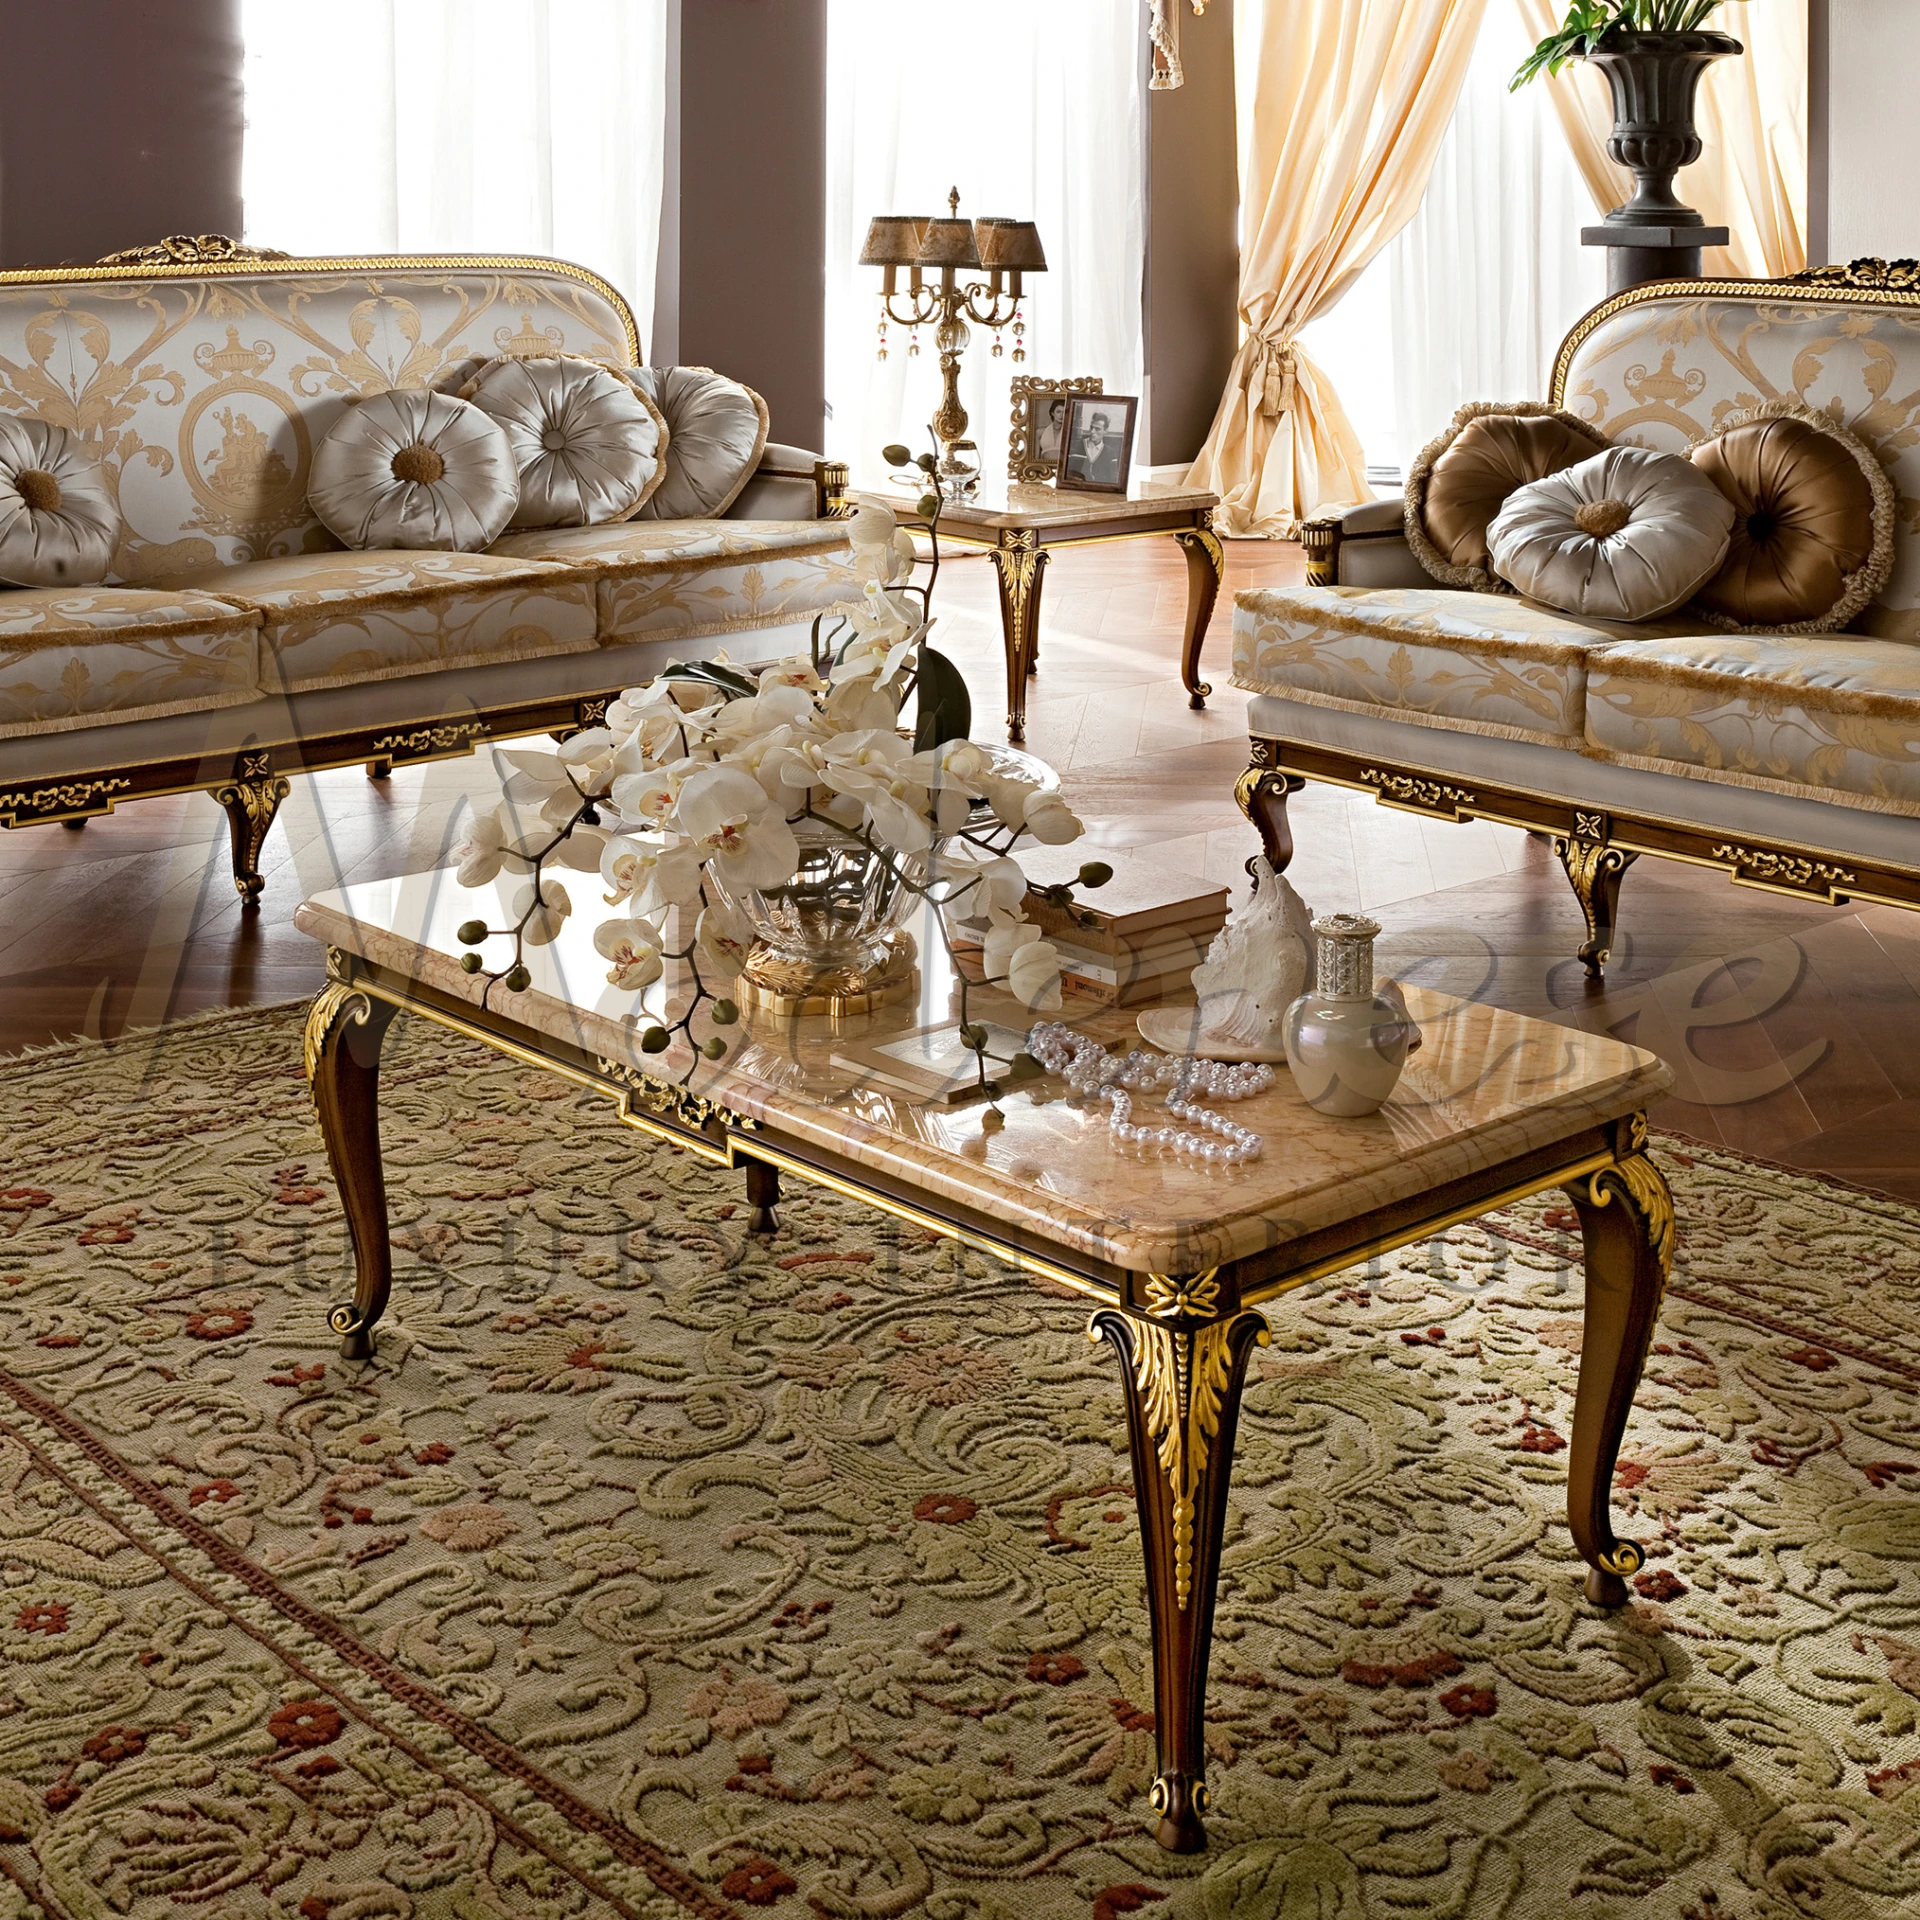 Customized luxury furniture - Classic Coffee Table with a modern twist, blending luxury and classic design seamlessly.
